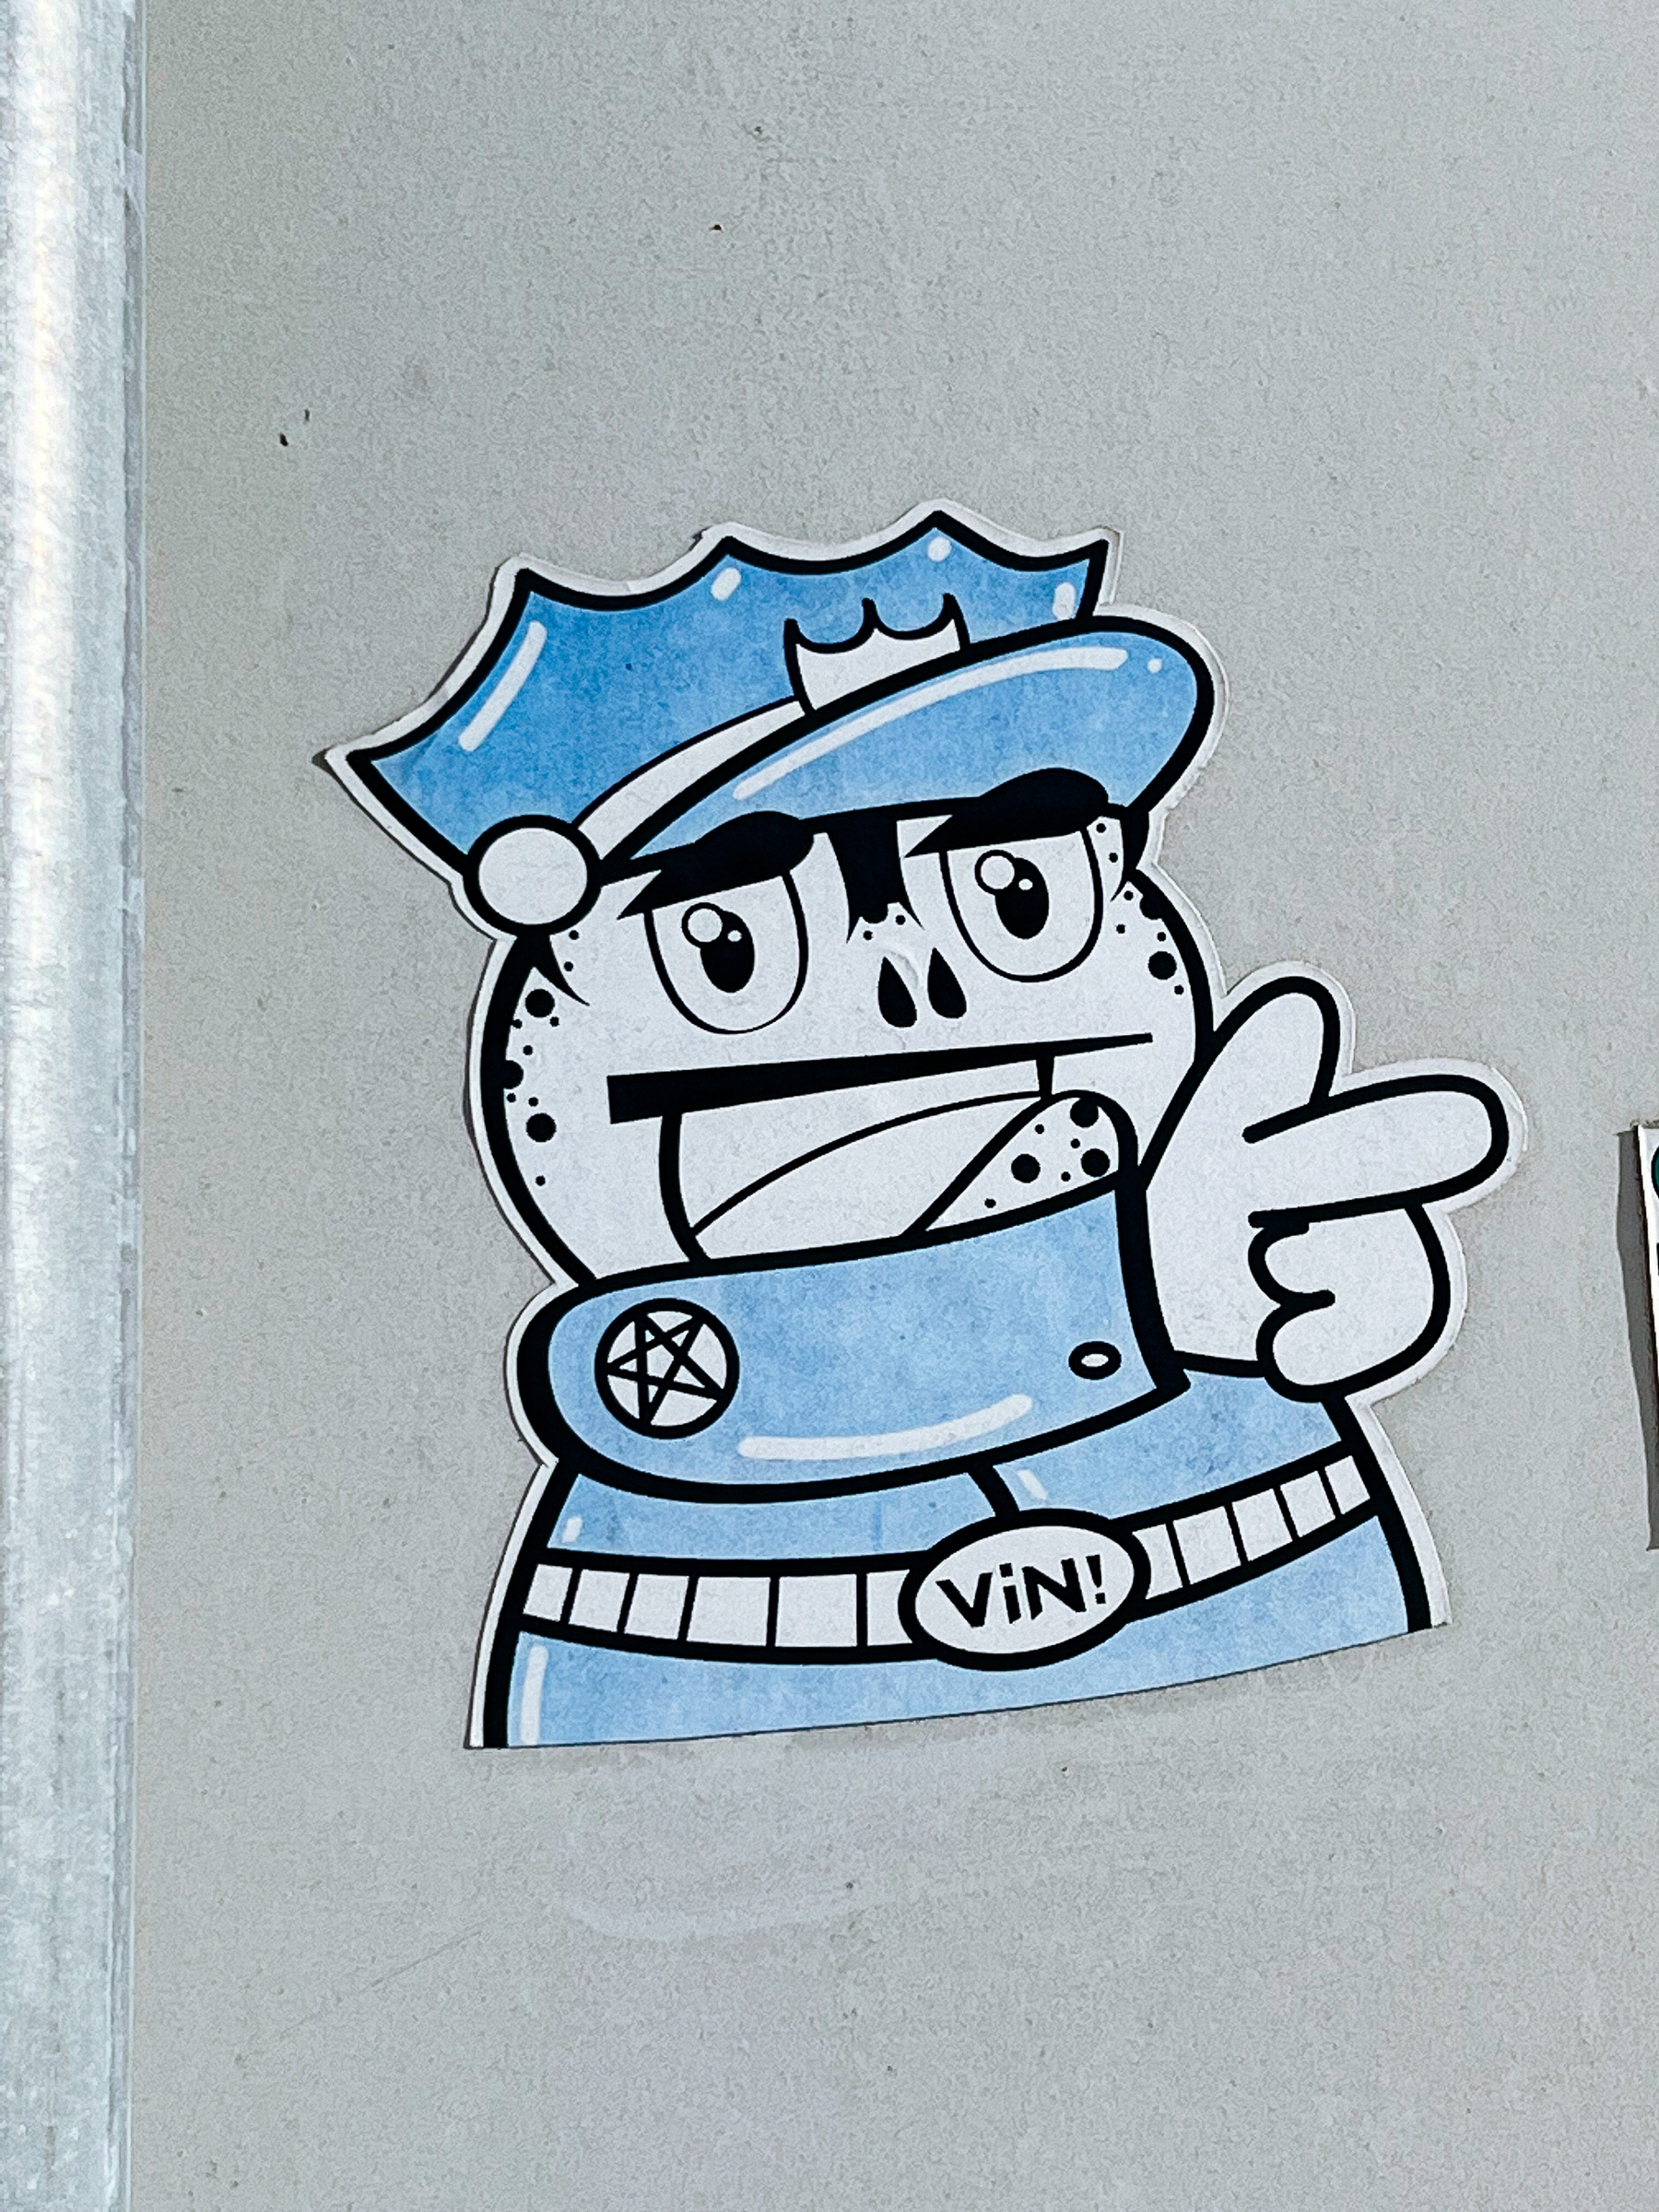 Sticker of a cartoon frog dressed as a policeman, using his hand as a gun. 